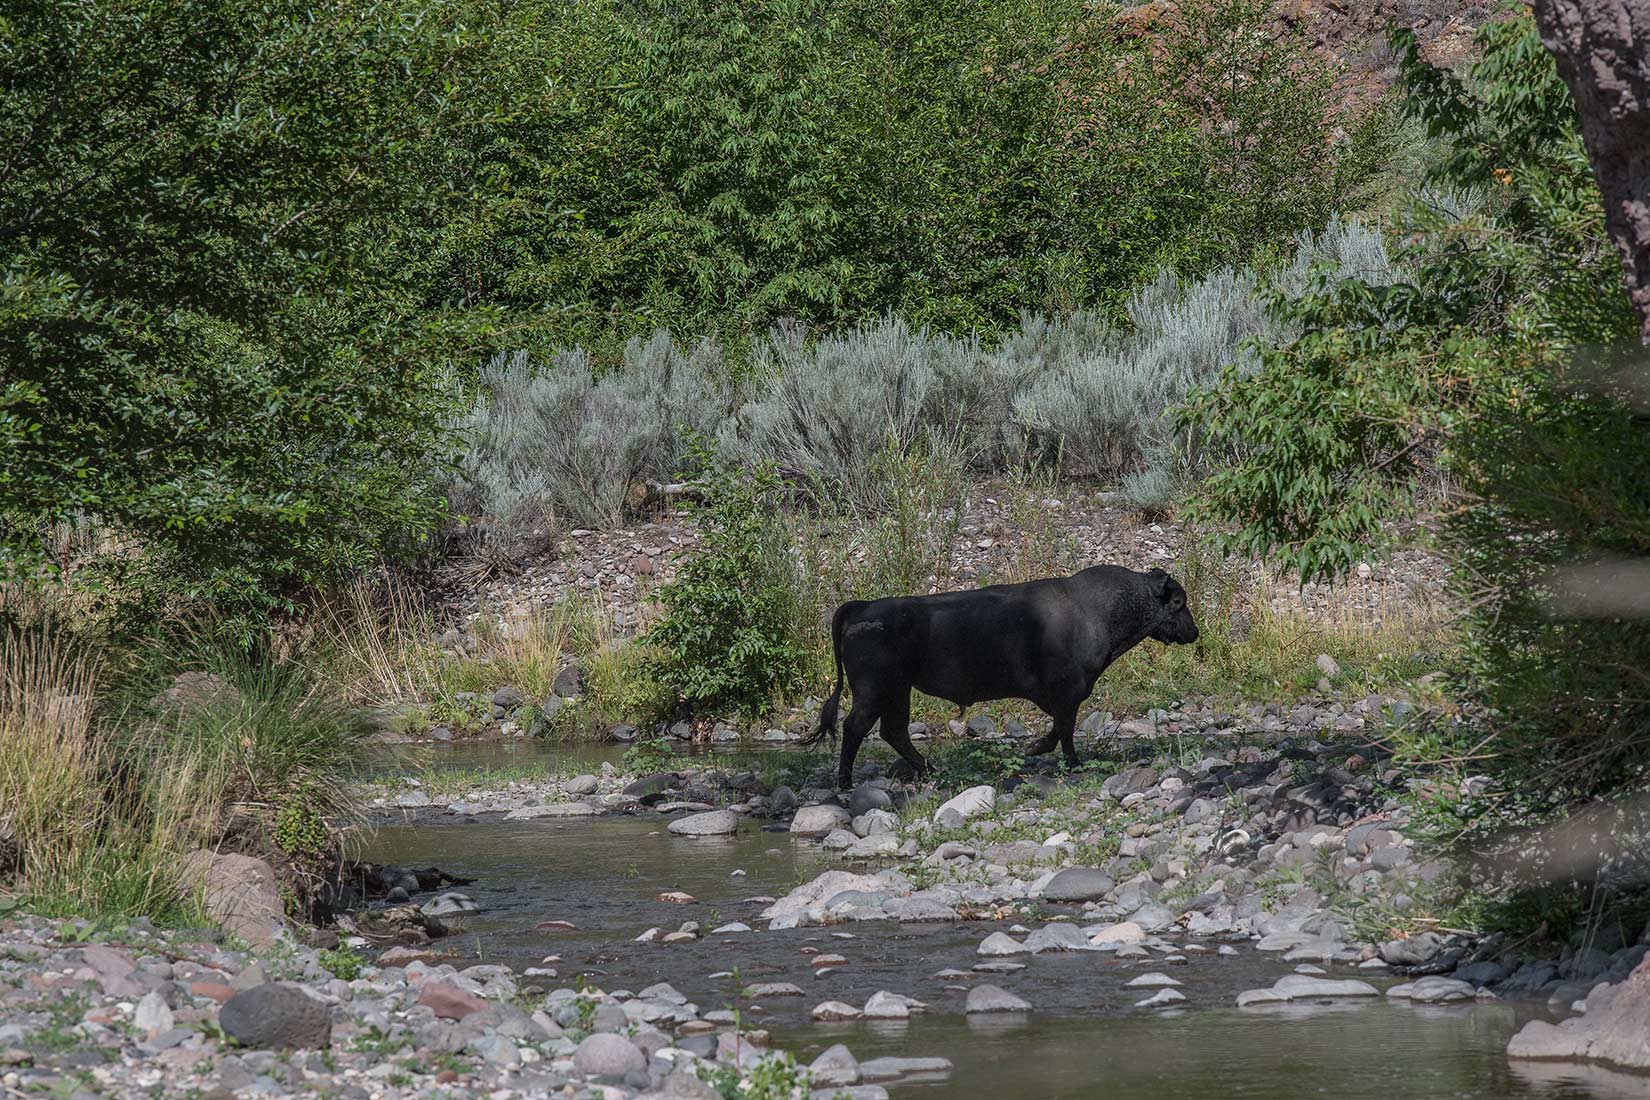 Forest officials said the feral cattle in the Gila Wilderness, like this bull, have been aggressive towards visitors, graze year-round, and trample stream banks and springs, causing erosion and sedimentation. (Courtesy of Robin Silver)